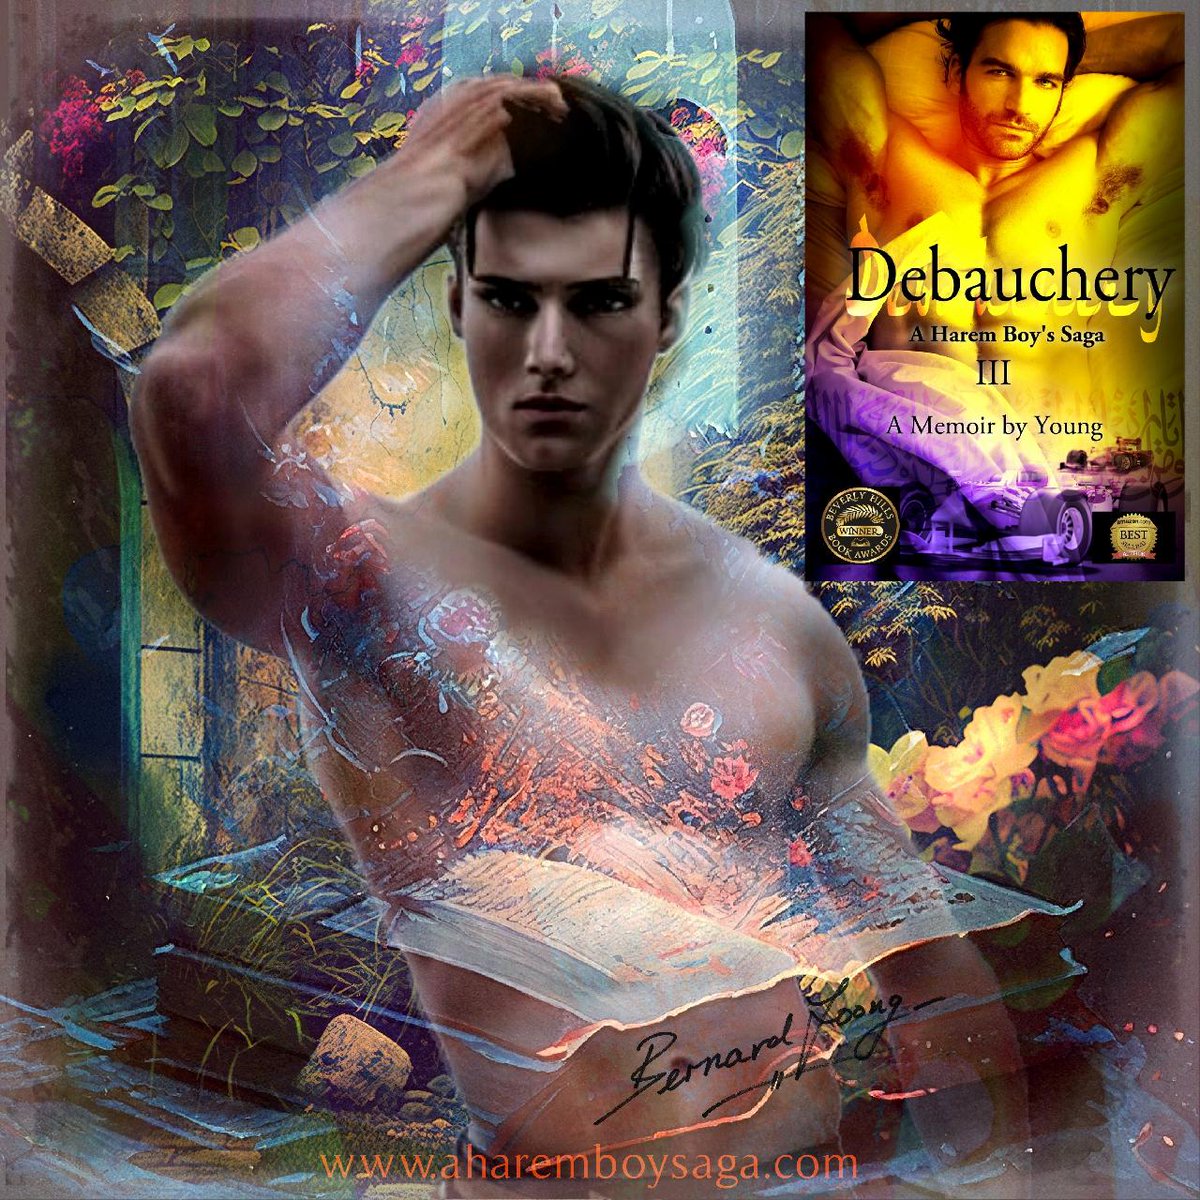 Sensually erotic body parts in movies will help sell tickets to DEBAUCHERY: getBook.at/DEBAUCHERY when it premieres. This is the 3rd book to a sensually captivating memoir about a young man coming of age in a secret society & a male harem.
#AuthorUproar
#BookBoost